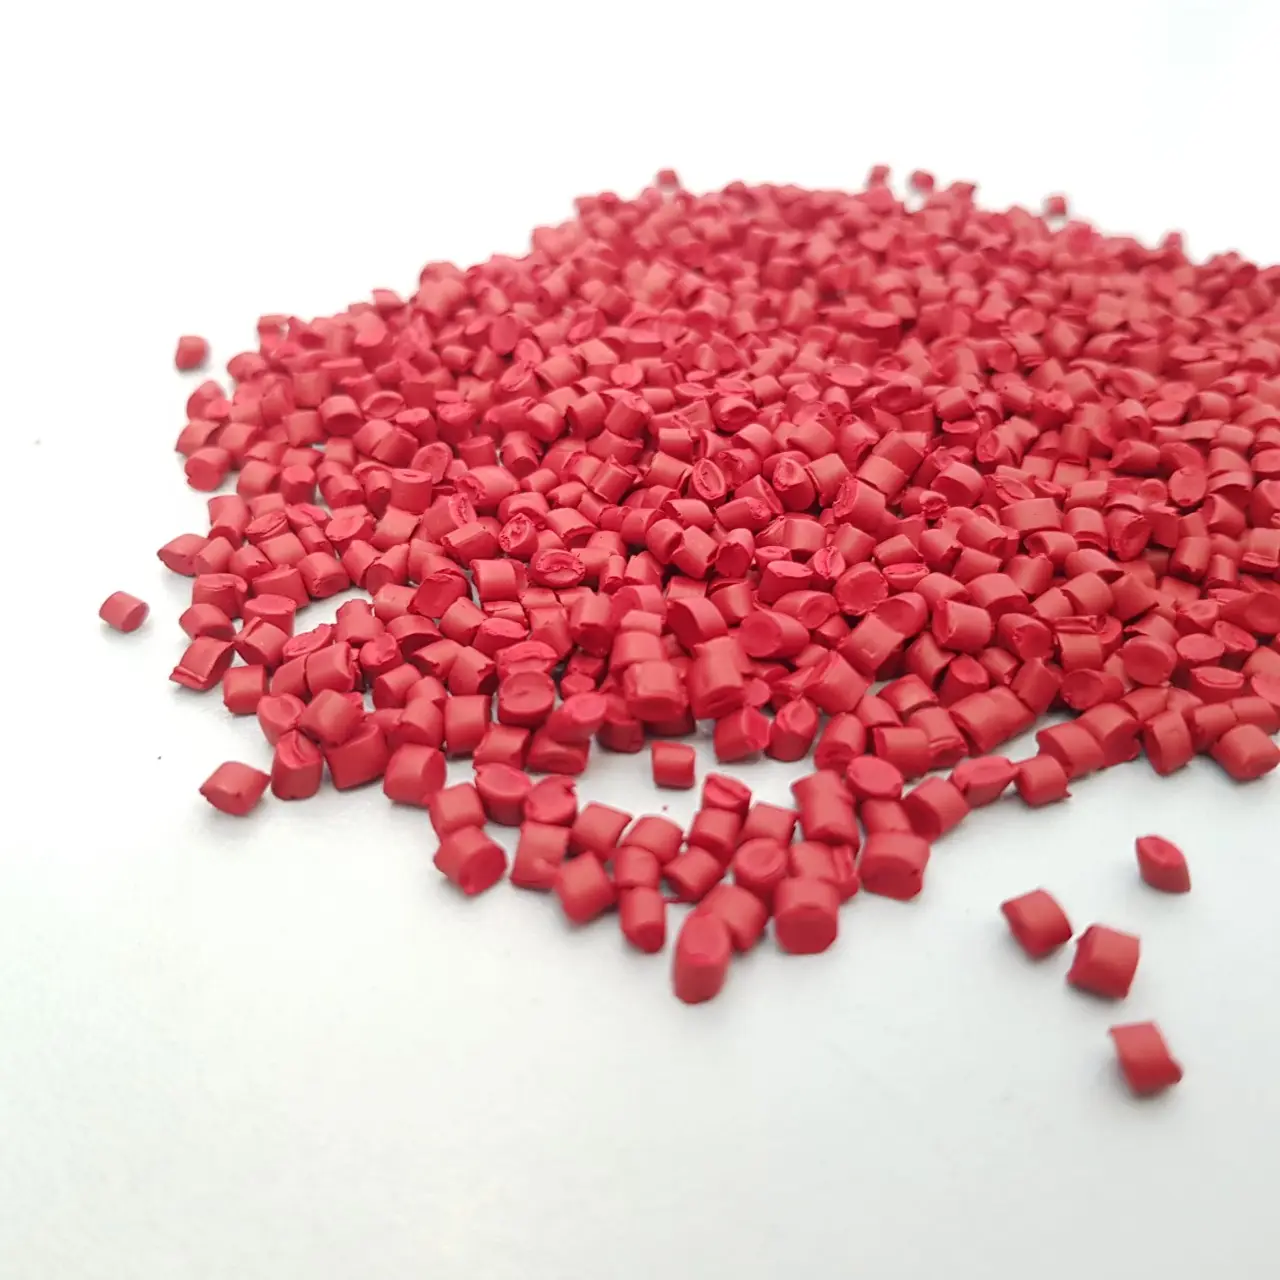 PE PP Raw Material Bulk Plastic Material Pellets with Red Colorful Masterbatch for plastic film roll, shopping bag...